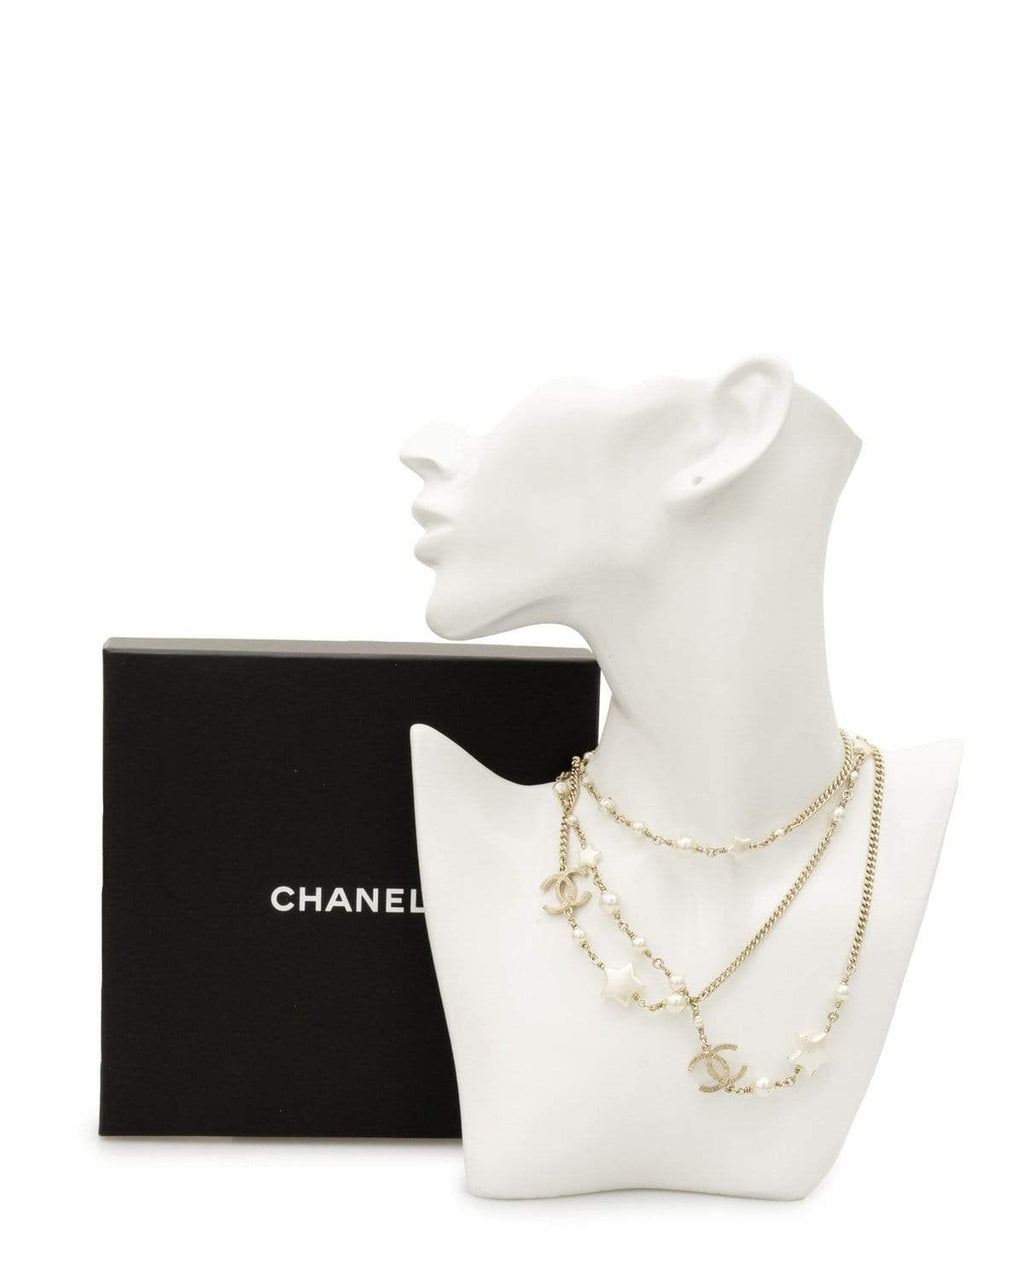 Chanel Jewelry Knockoffs (and Where to Get Them) | LoveToKnow